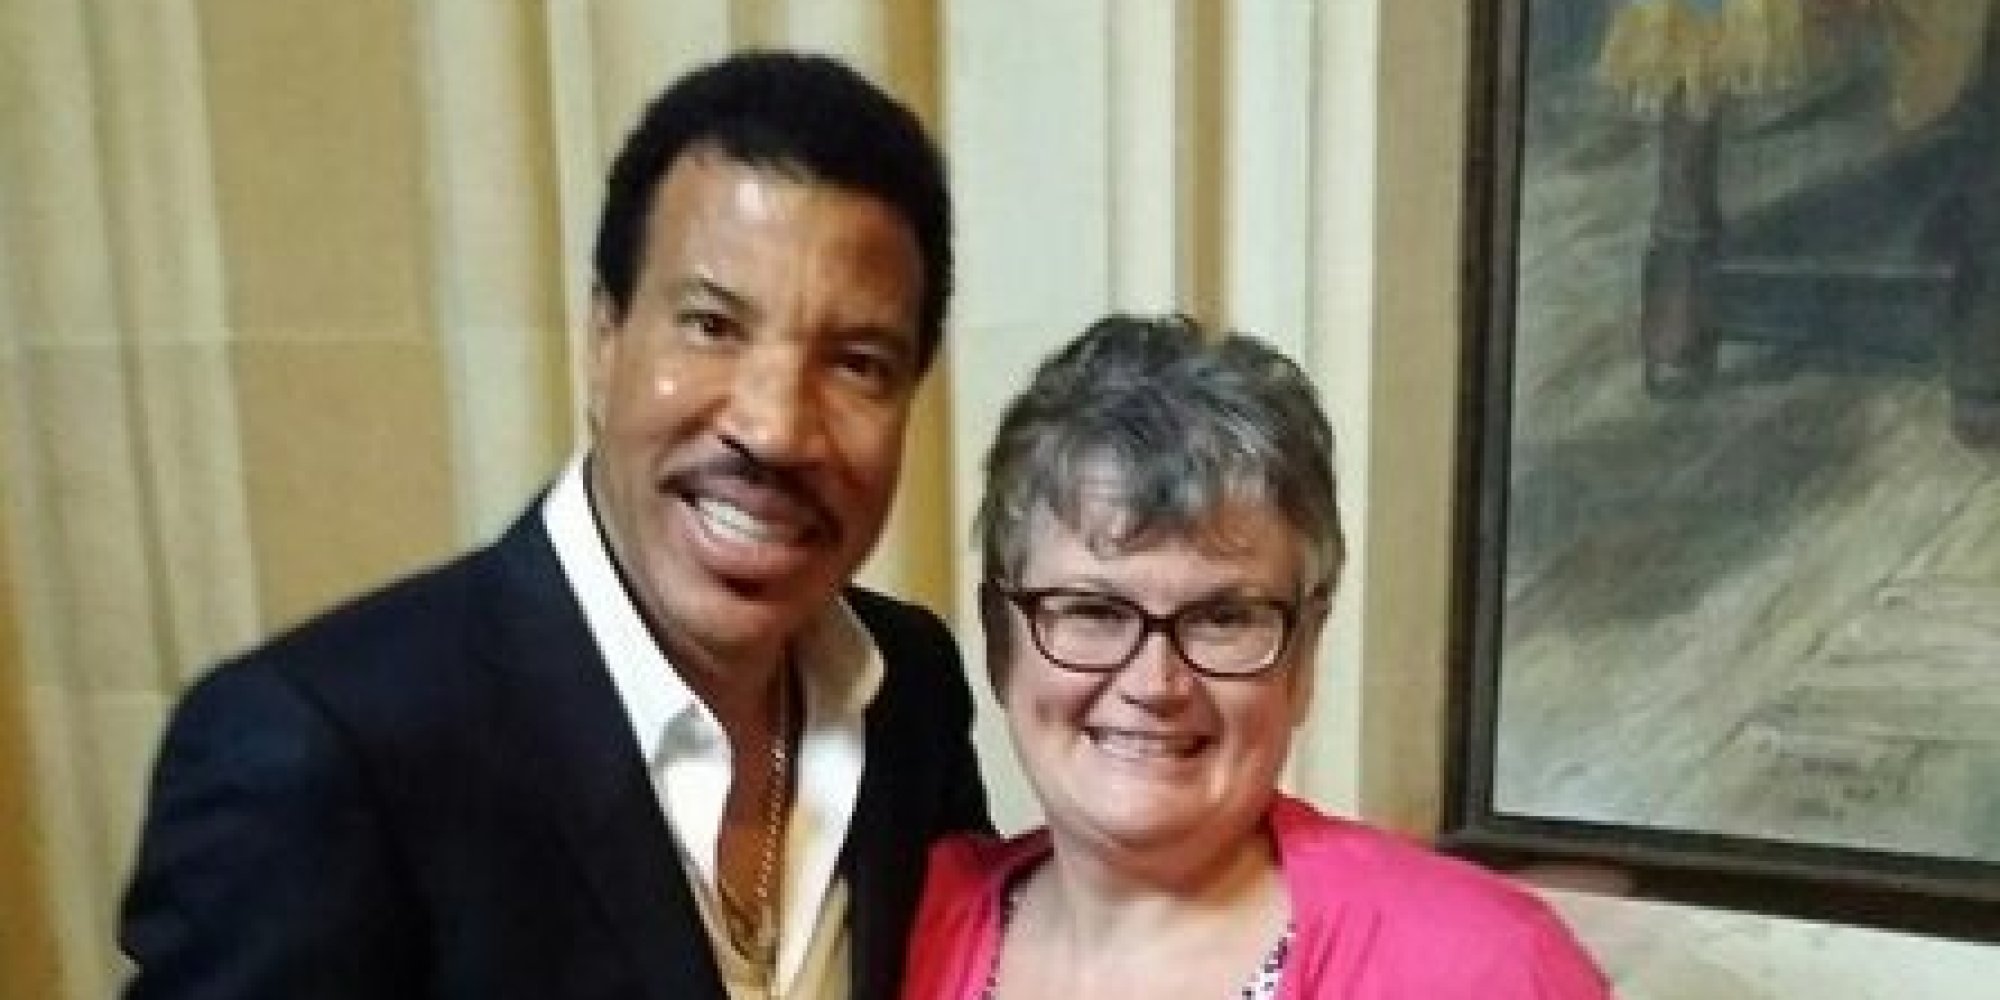 Lionel Richie Makes Shock Appearance In UK Parliament Ahead Of